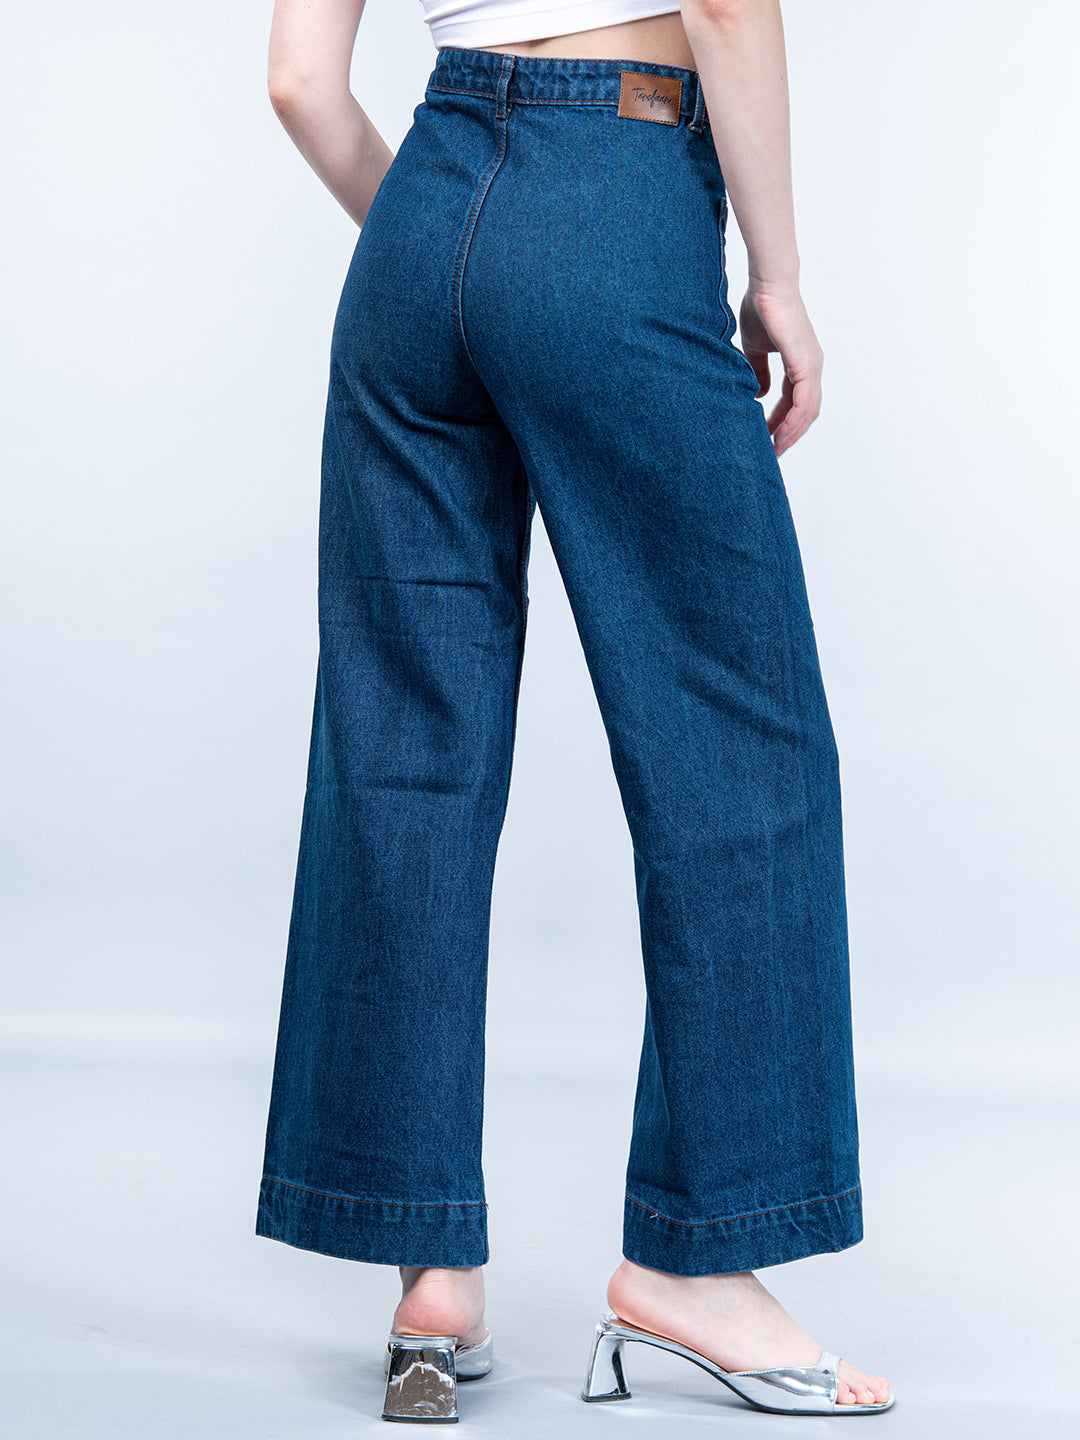 Skinny Denim Pencil Jeans Woman Elastic High Waist Trousers Black Blue  Stretch Plus Size Washed at Rs 2696.83 | Women Jeans, Girls Jeans, लड़कियों  की जीन्स - My Online Collection Store, Bengaluru | ID: 2851546834391